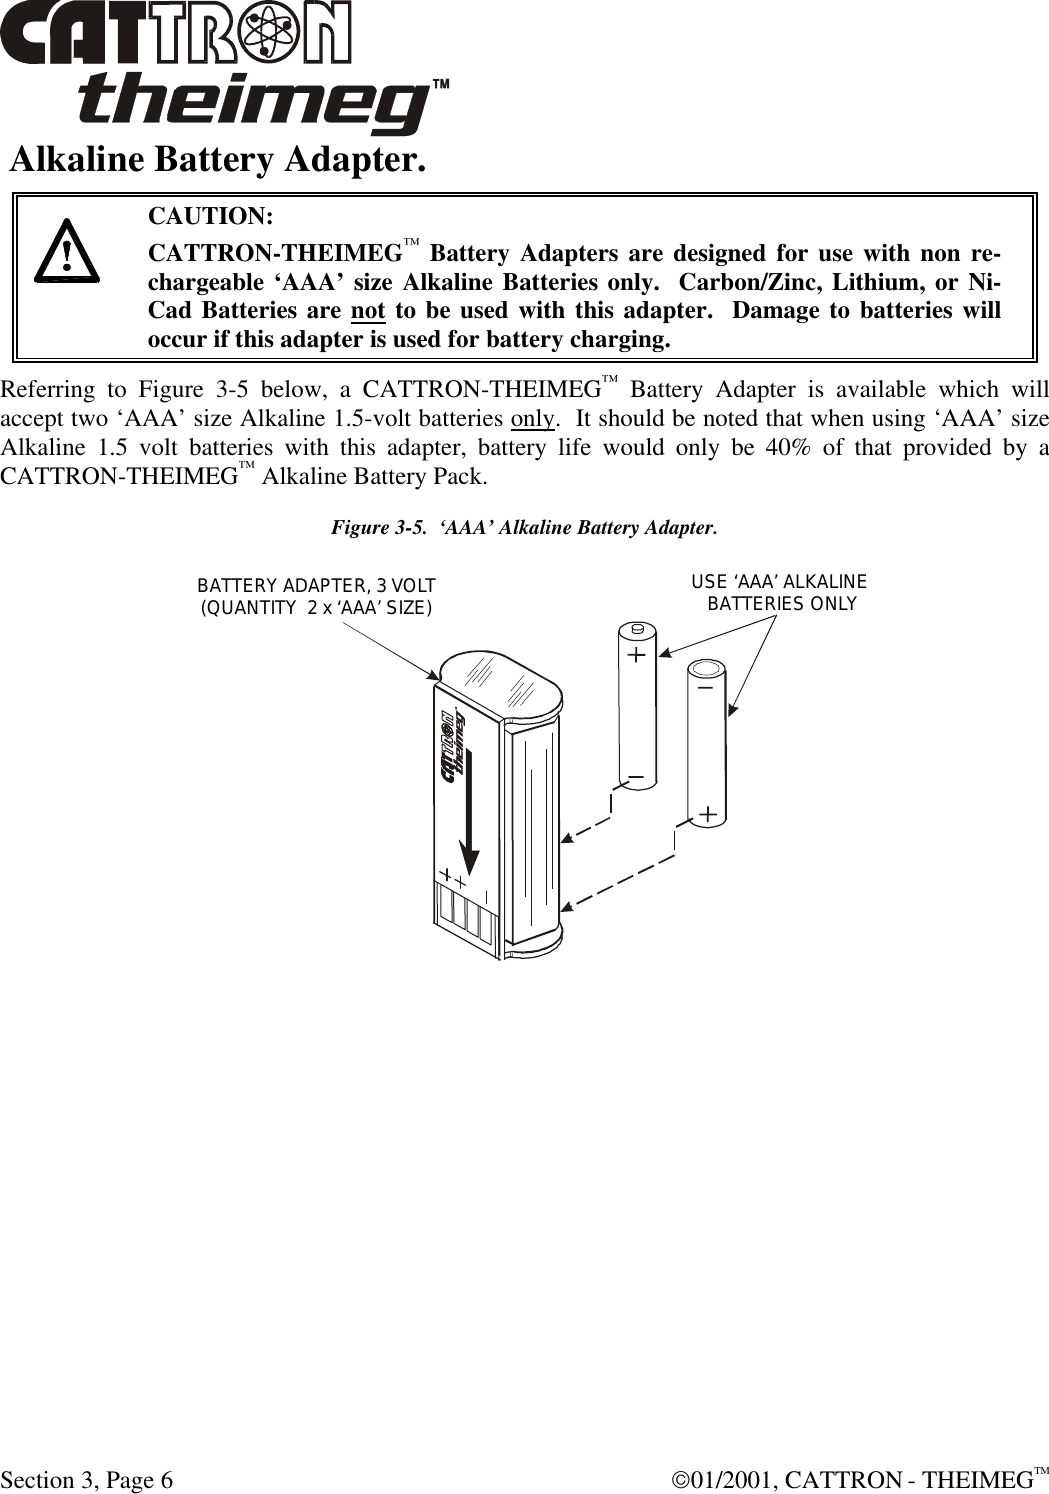  Section 3, Page 6  01/2001, CATTRON - THEIMEGTM  Alkaline Battery Adapter.    CAUTION: CATTRON-THEIMEG™ Battery Adapters are designed for use with non re-chargeable ‘AAA’ size Alkaline Batteries only.  Carbon/Zinc, Lithium, or Ni-Cad Batteries are not to be used with this adapter.  Damage to batteries will occur if this adapter is used for battery charging. Referring to Figure 3-5 below, a CATTRON-THEIMEG™ Battery Adapter is available which will accept two ‘AAA’ size Alkaline 1.5-volt batteries only.  It should be noted that when using ‘AAA’ size Alkaline 1.5 volt batteries with this adapter, battery life would only be 40% of that provided by a CATTRON-THEIMEG™ Alkaline Battery Pack.  Figure 3-5.  ‘AAA’ Alkaline Battery Adapter.  USE ‘AAA’ ALKALINE BATTERIES ONLYBATTERY ADAPTER, 3 VOLT(QUANTITY  2 x ‘AAA’ SIZE) 